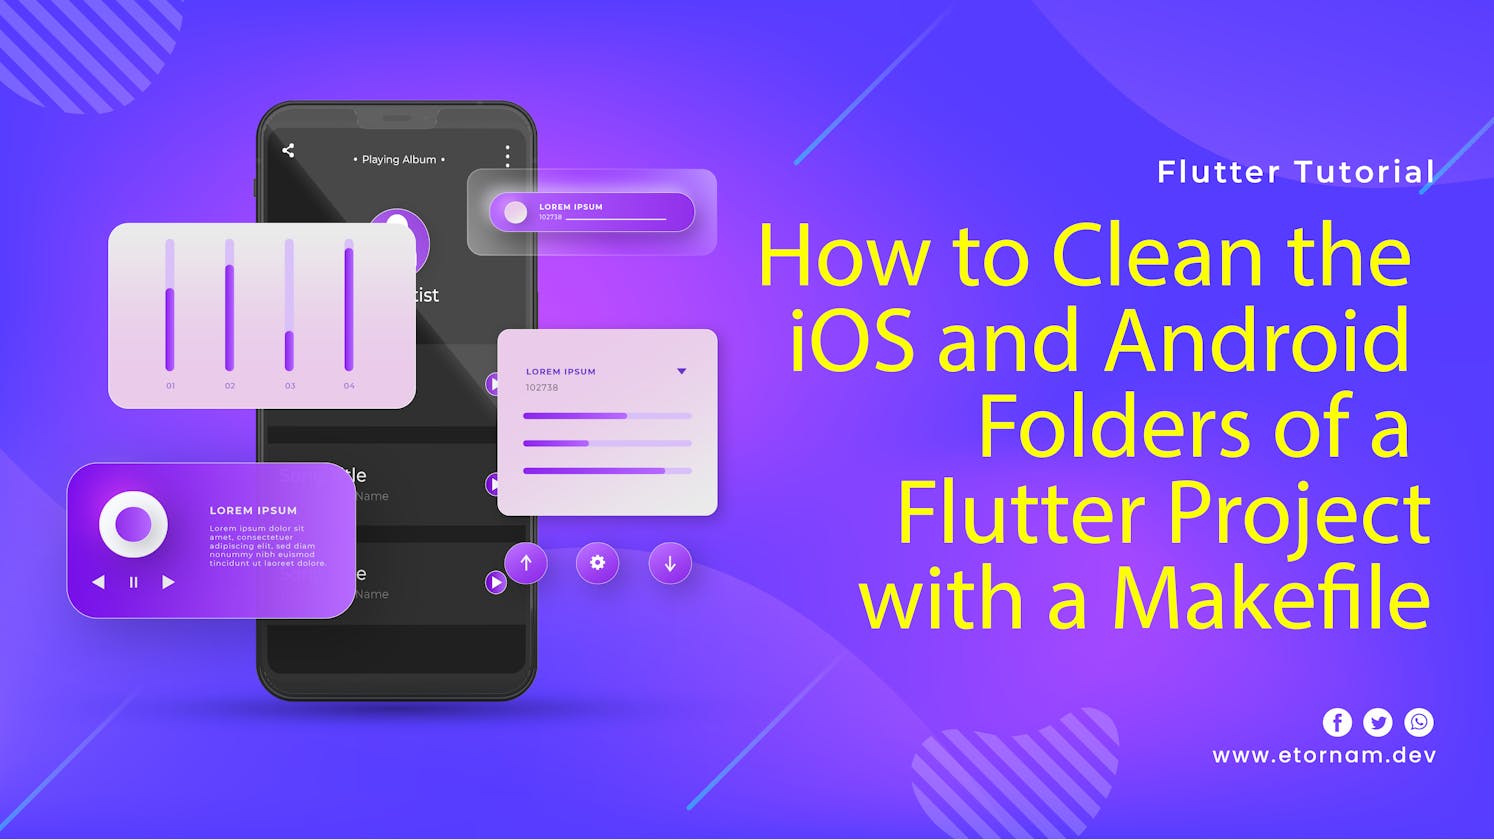 How to Clean the iOS and Android Folders of a Flutter Project with a Makefile